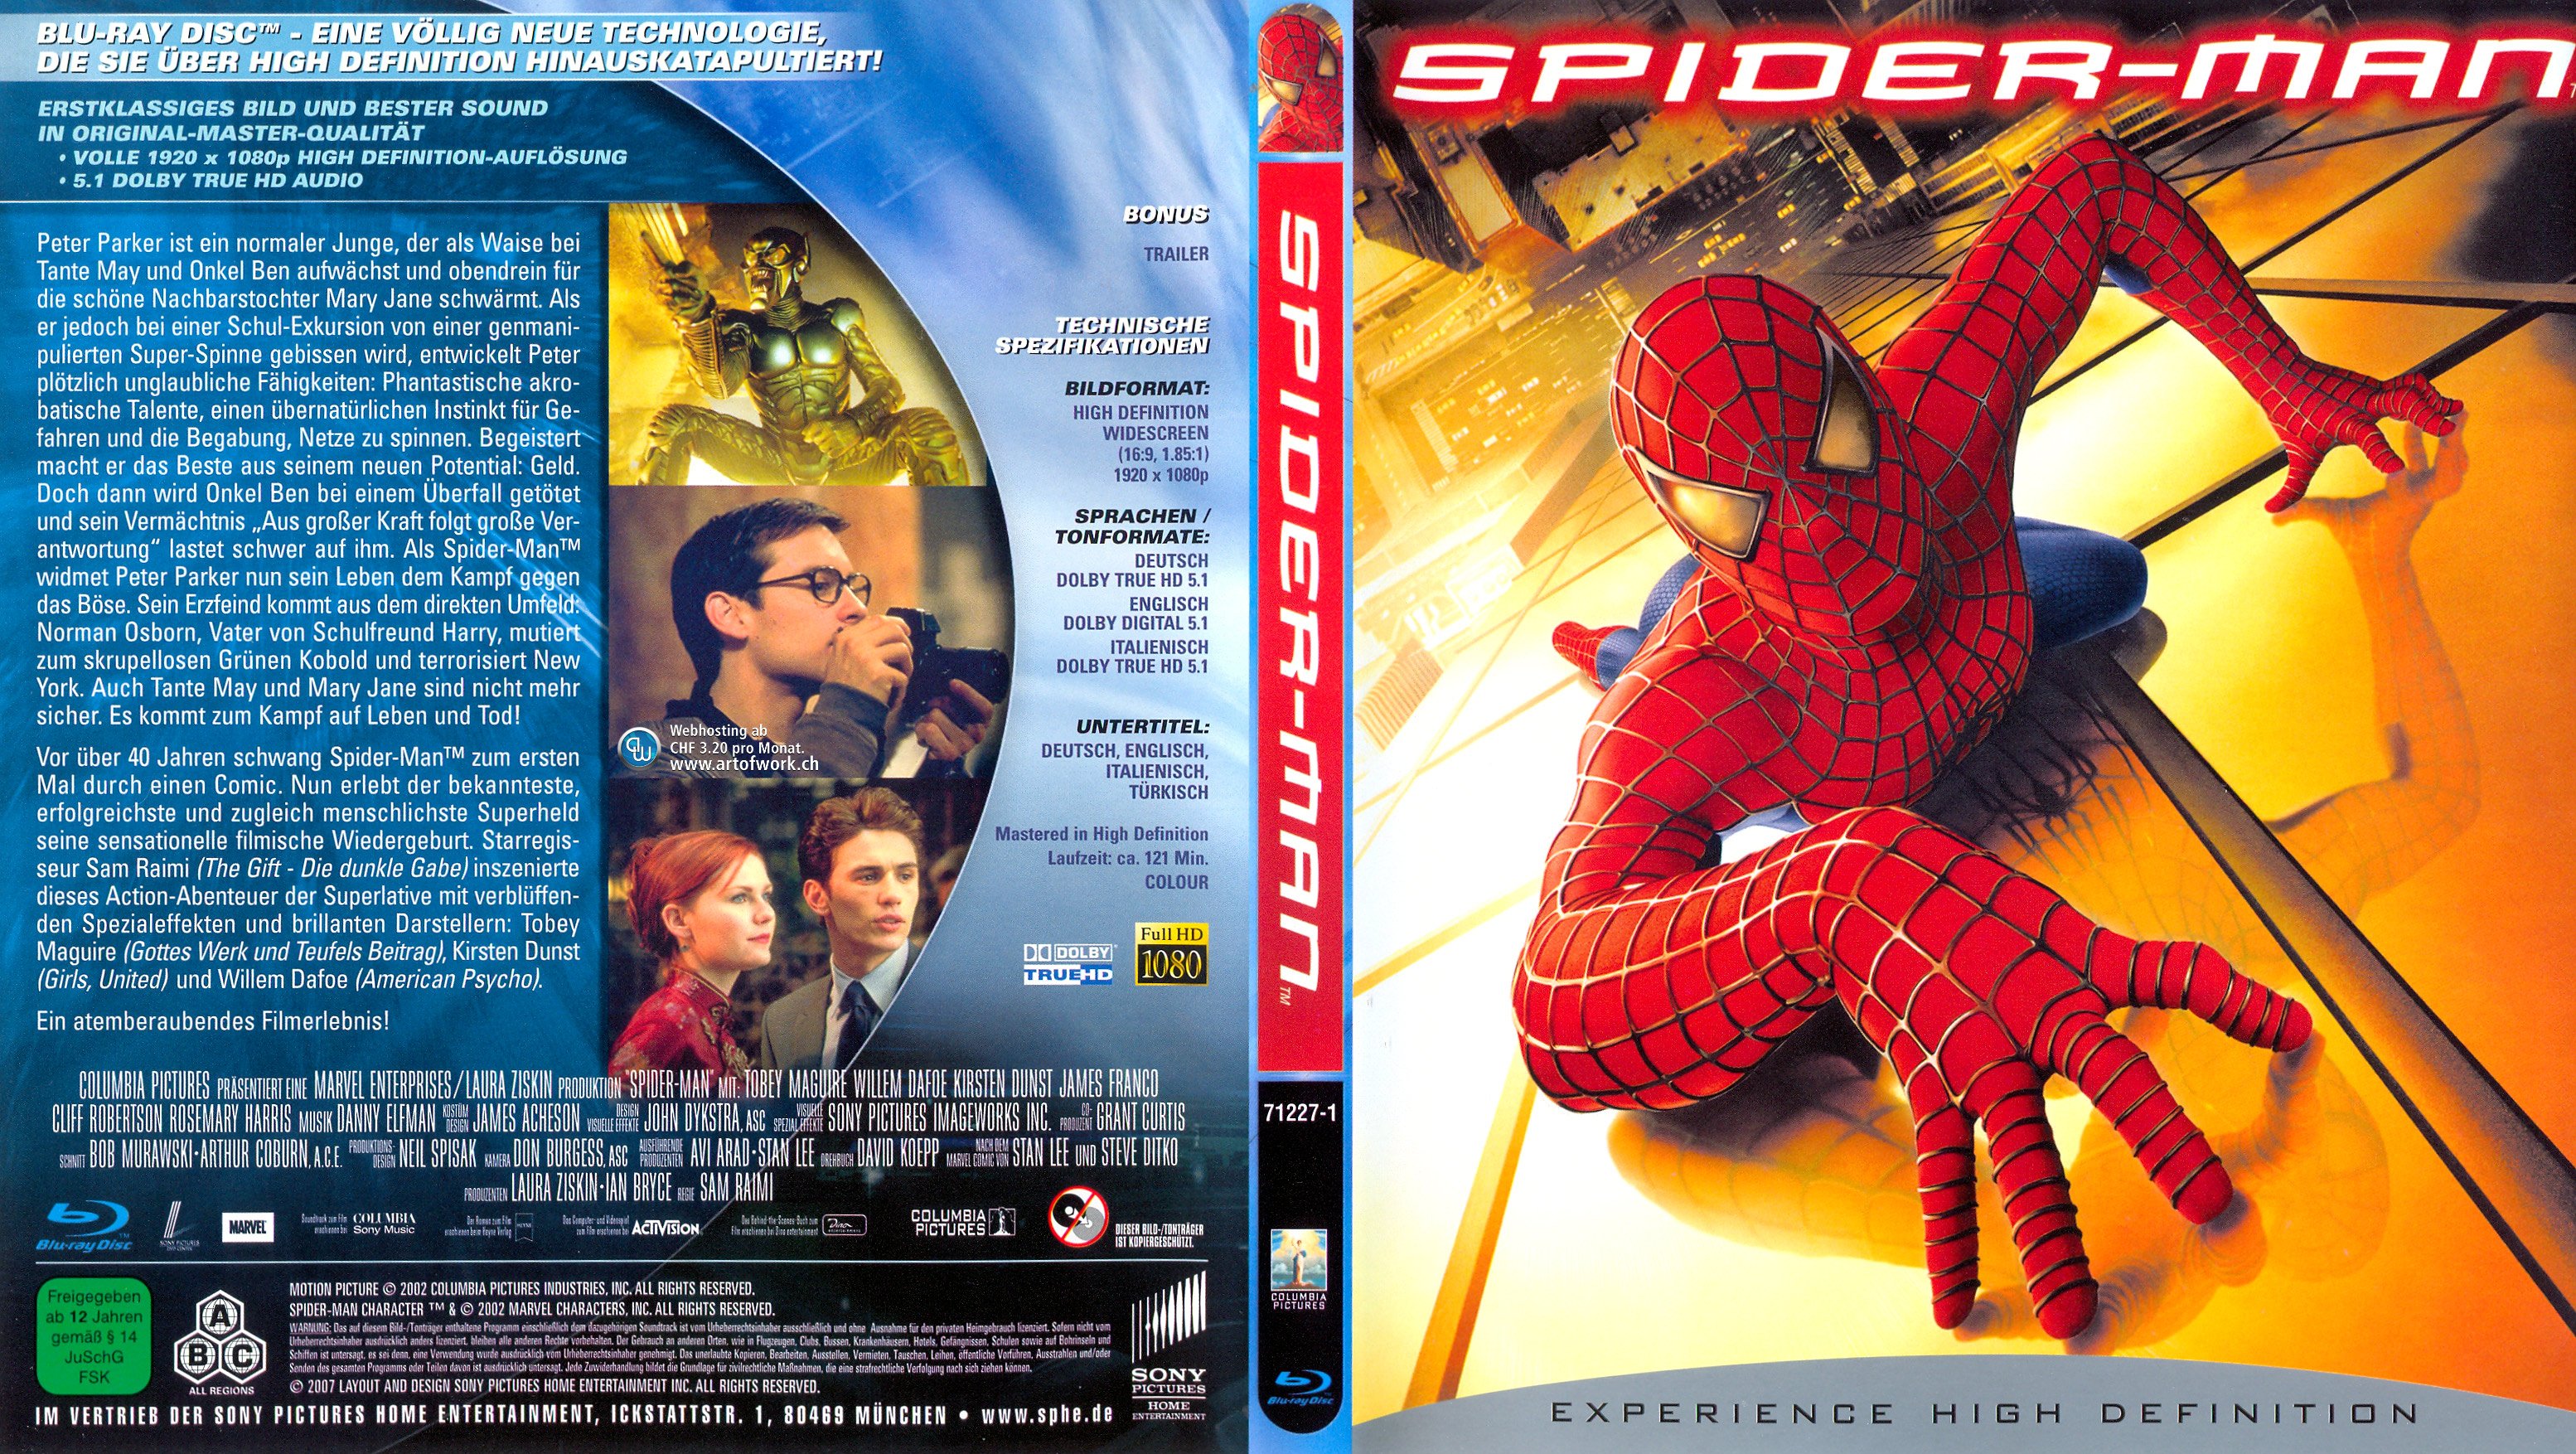 Spider man 1 blu-ray download torrent eric turner angels and stars cazzette torrent